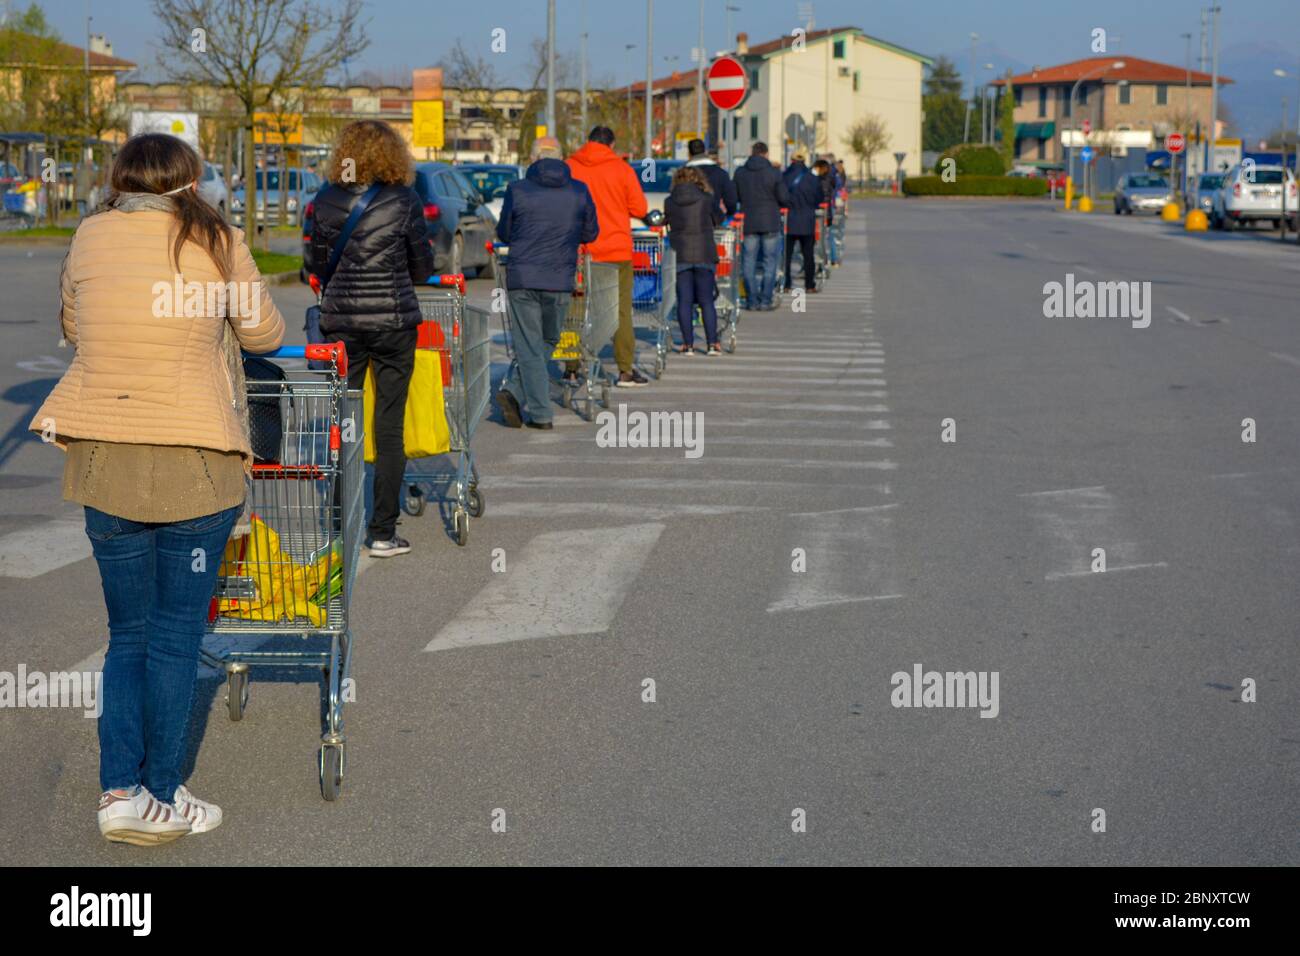 Line of  men and women with COVID-19 protective masks waiting with shopping carts to buy essentials. Stress, tension and social distancing in pandemic Stock Photo